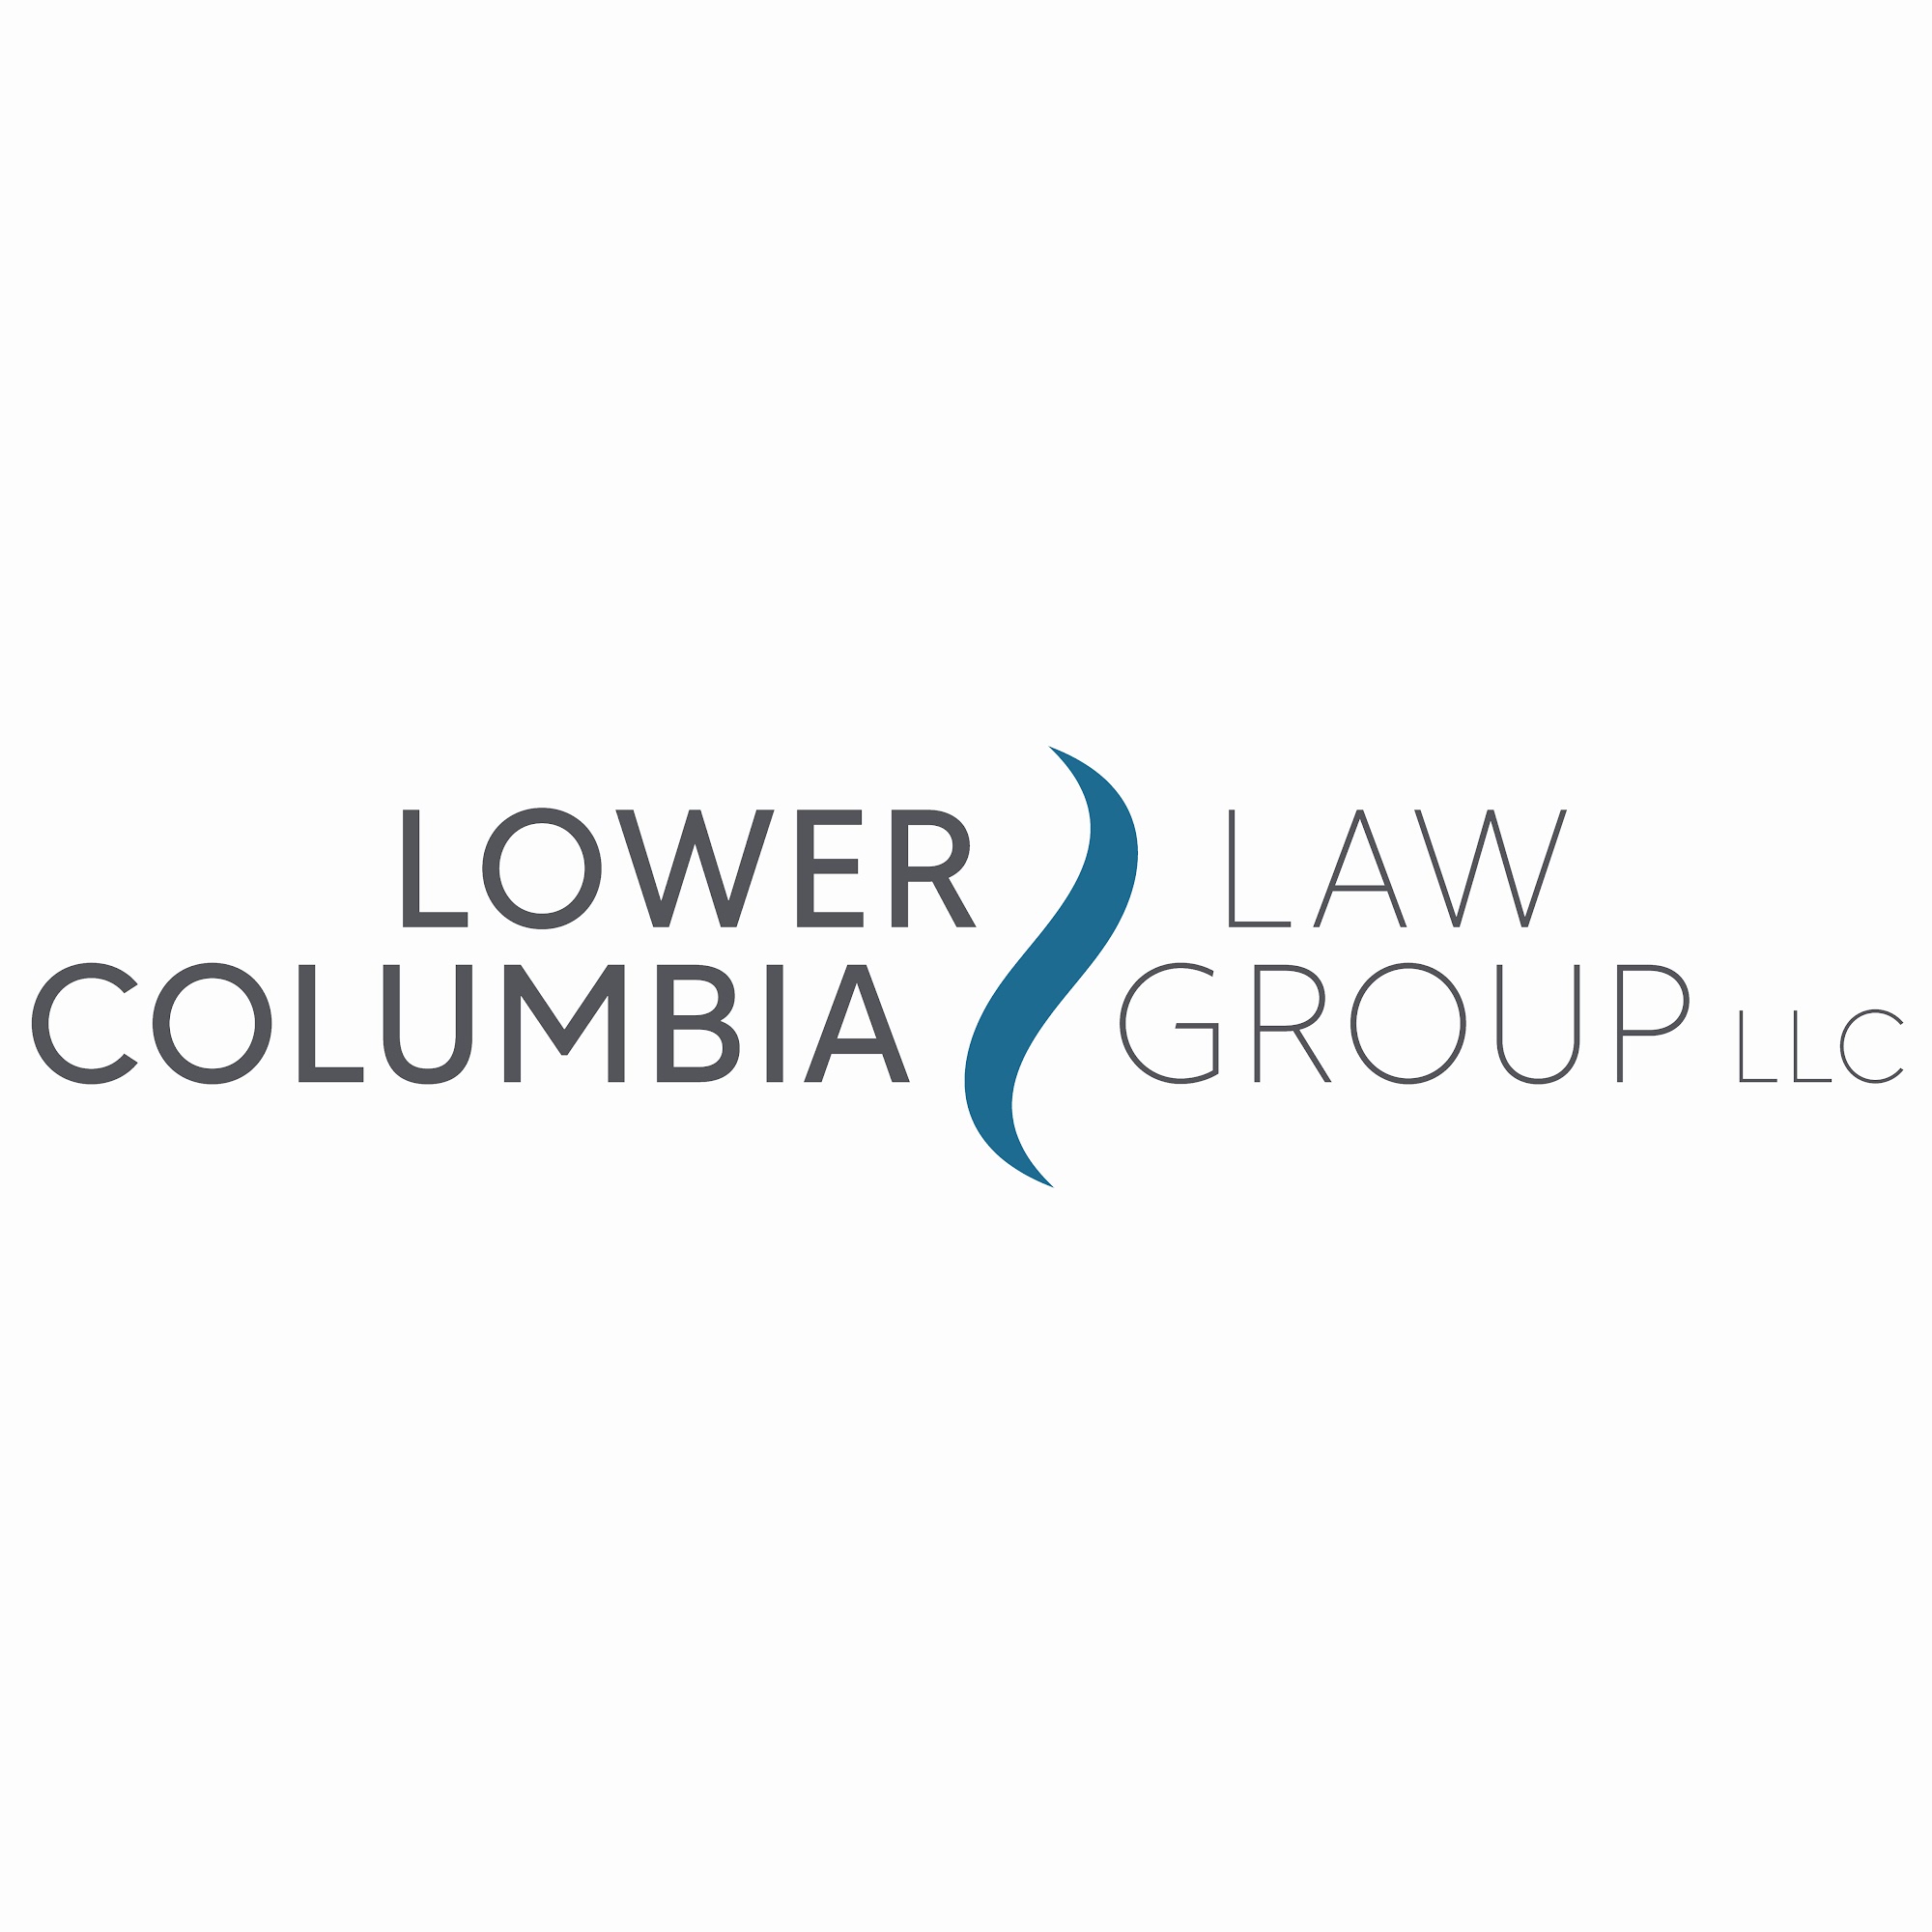 Lower Columbia Law Group LLC 52490 SE 2nd St Ste 100, Scappoose Oregon 97056